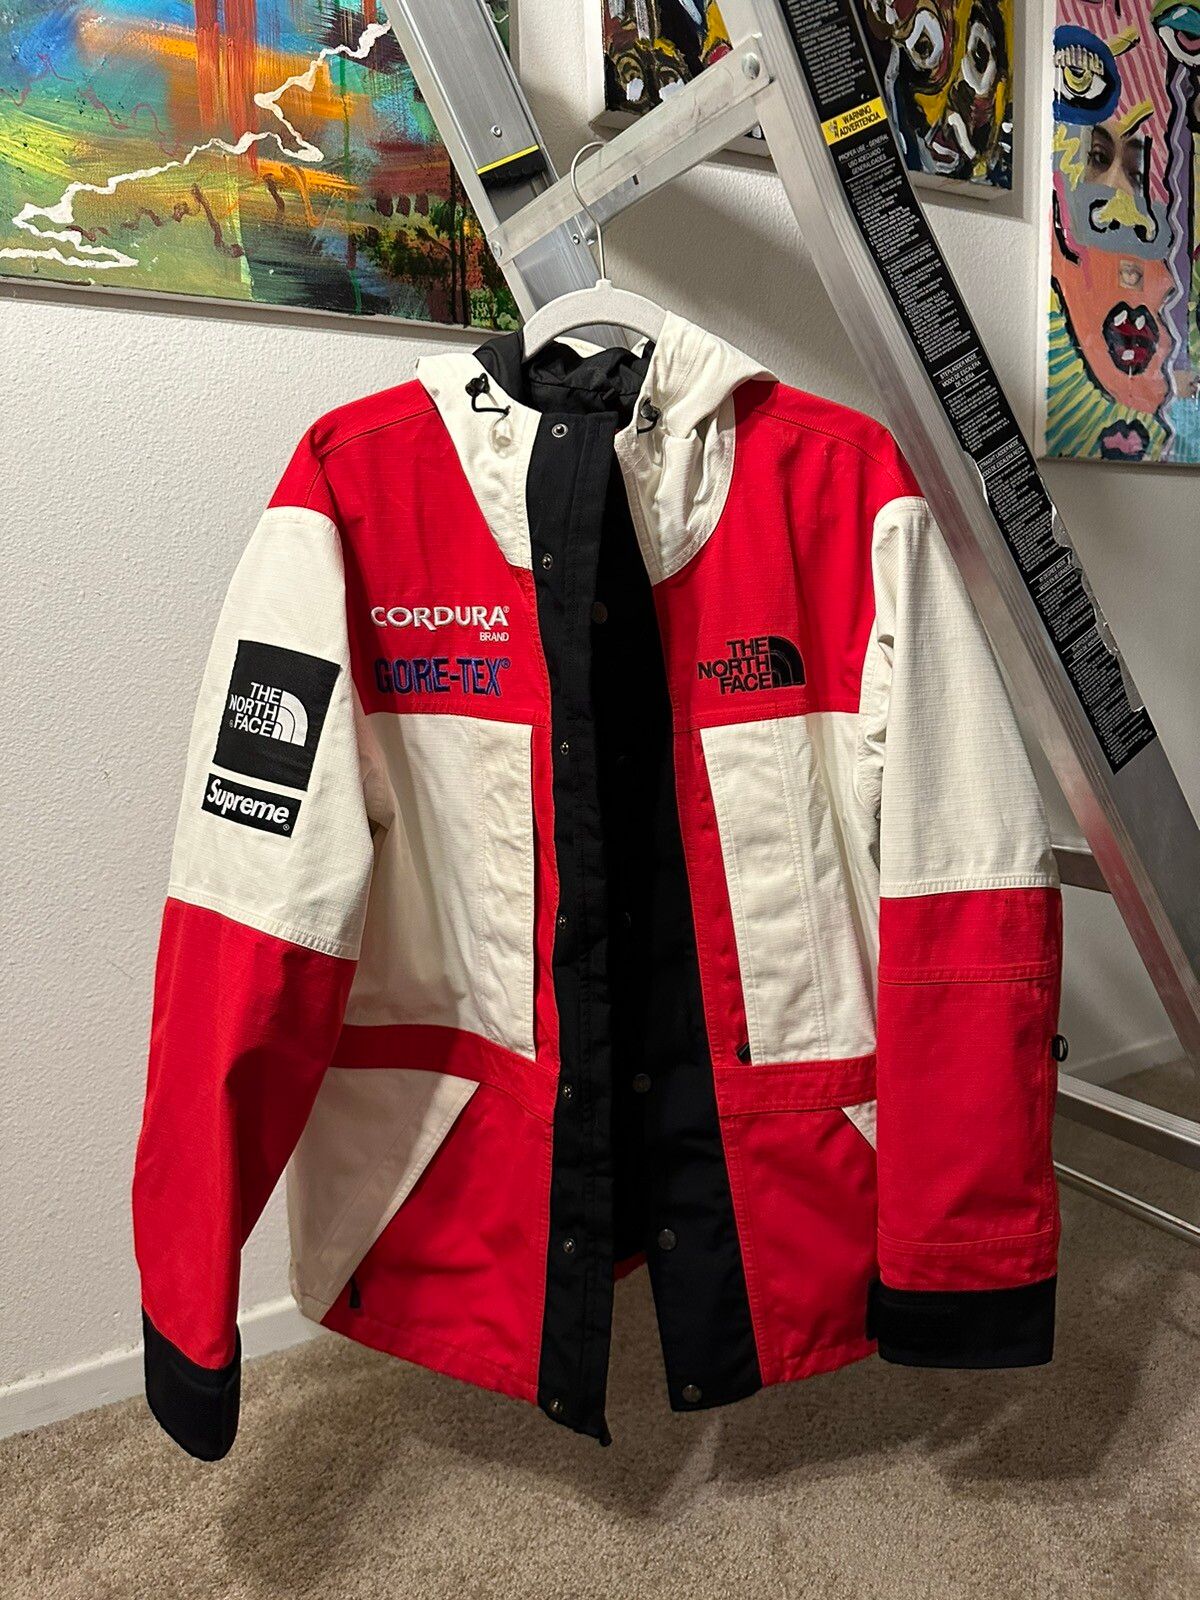 Supreme Supreme x The North Face x Goretex Expedition Jacket (FW18) Size US M / EU 48-50 / 2 - 2 Preview